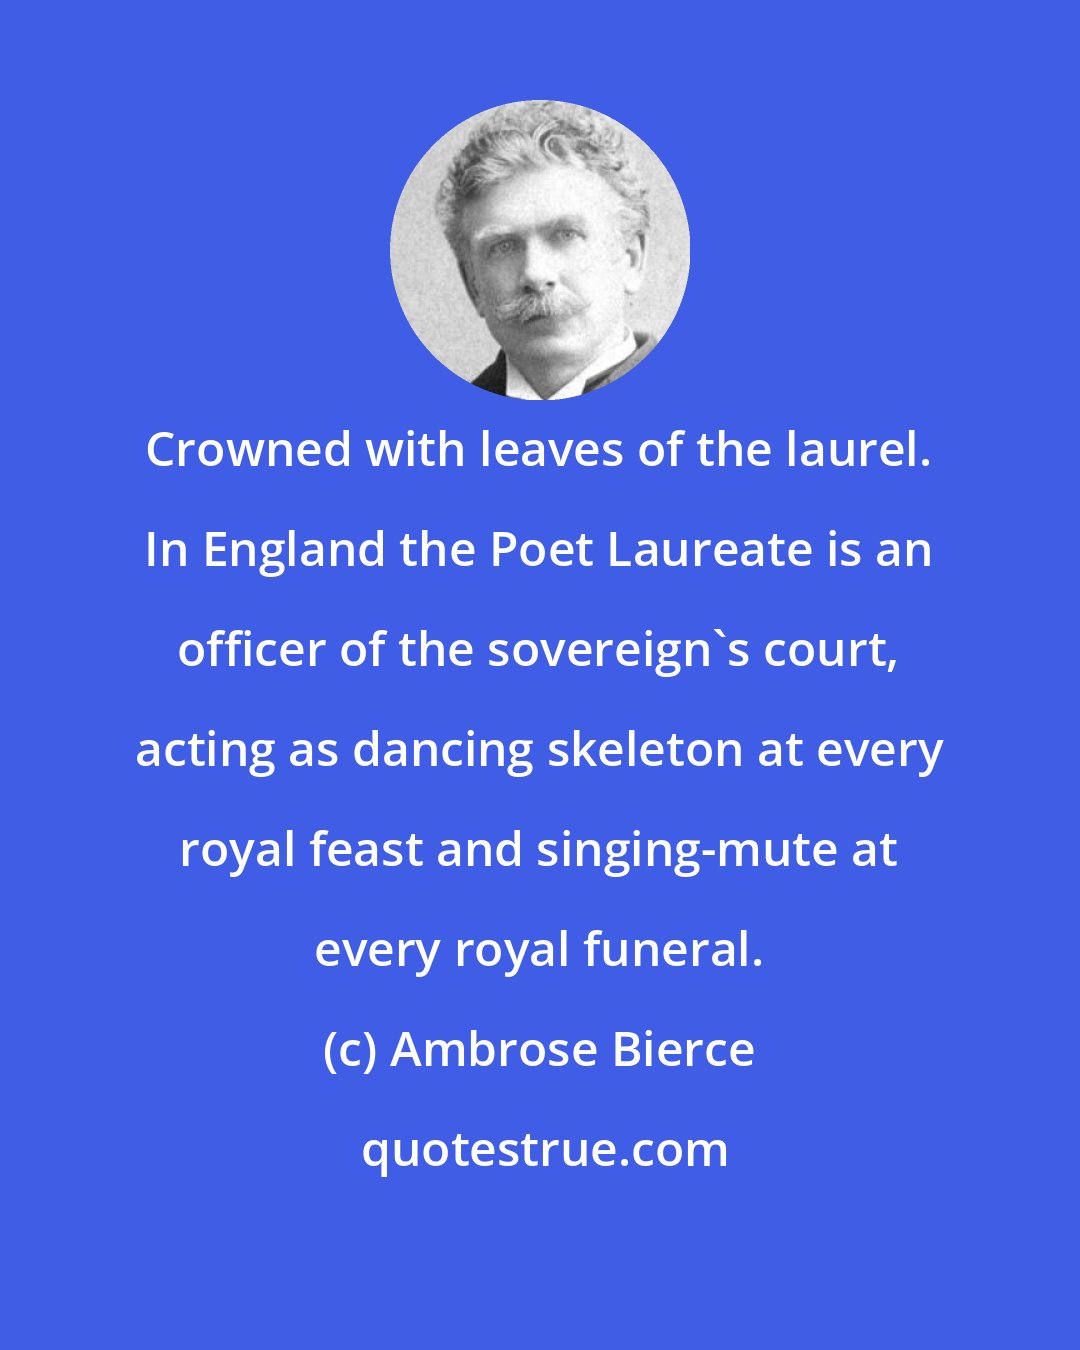 Ambrose Bierce: Crowned with leaves of the laurel. In England the Poet Laureate is an officer of the sovereign's court, acting as dancing skeleton at every royal feast and singing-mute at every royal funeral.